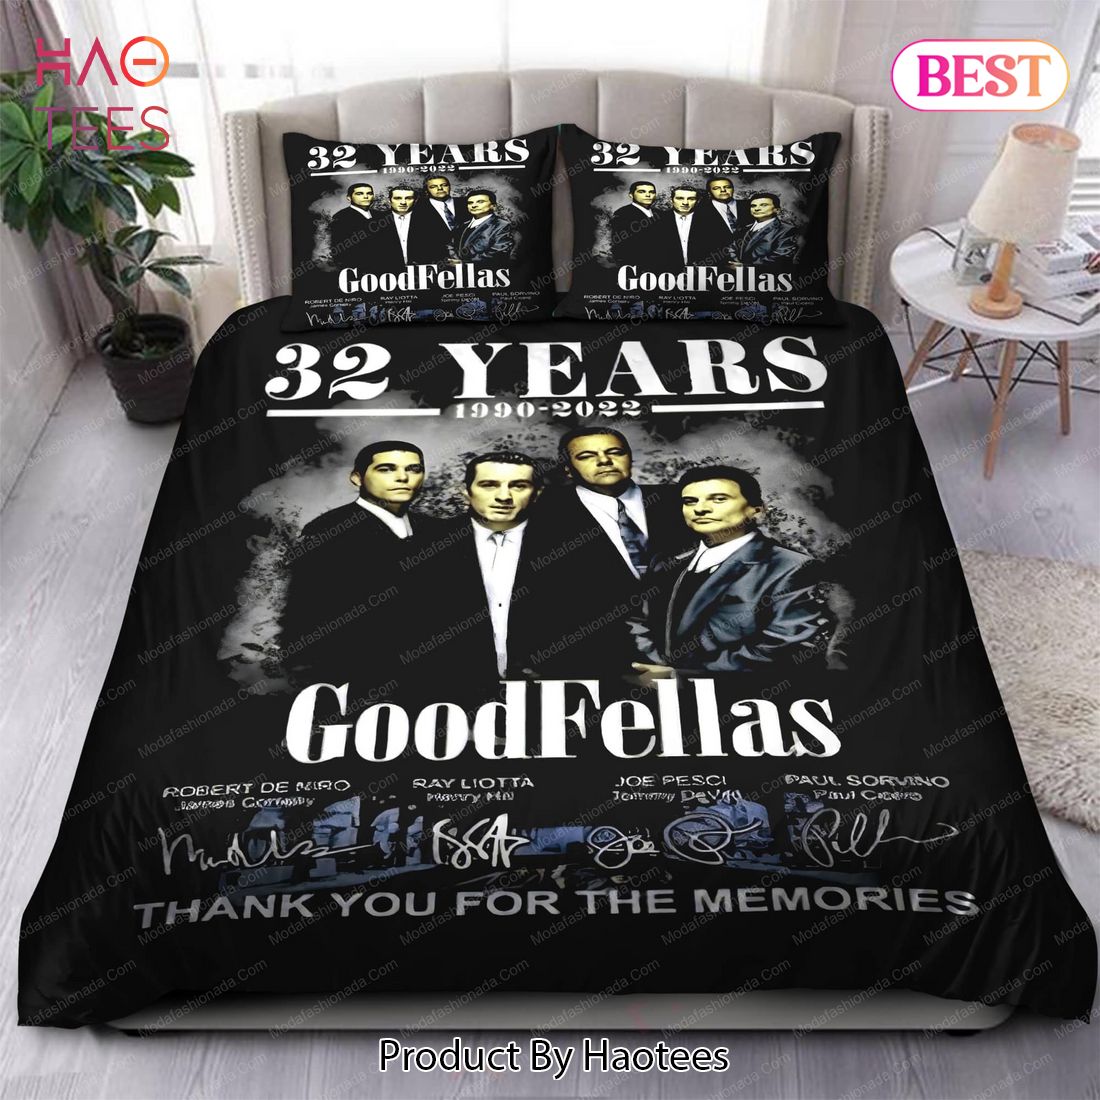 Buy Thank You For The Memories 32 Years GoodFellas Paul Sorvino Bedding Sets Bed Sets, Bedroom Sets, Comforter Sets, Duvet Cover, Bedspread